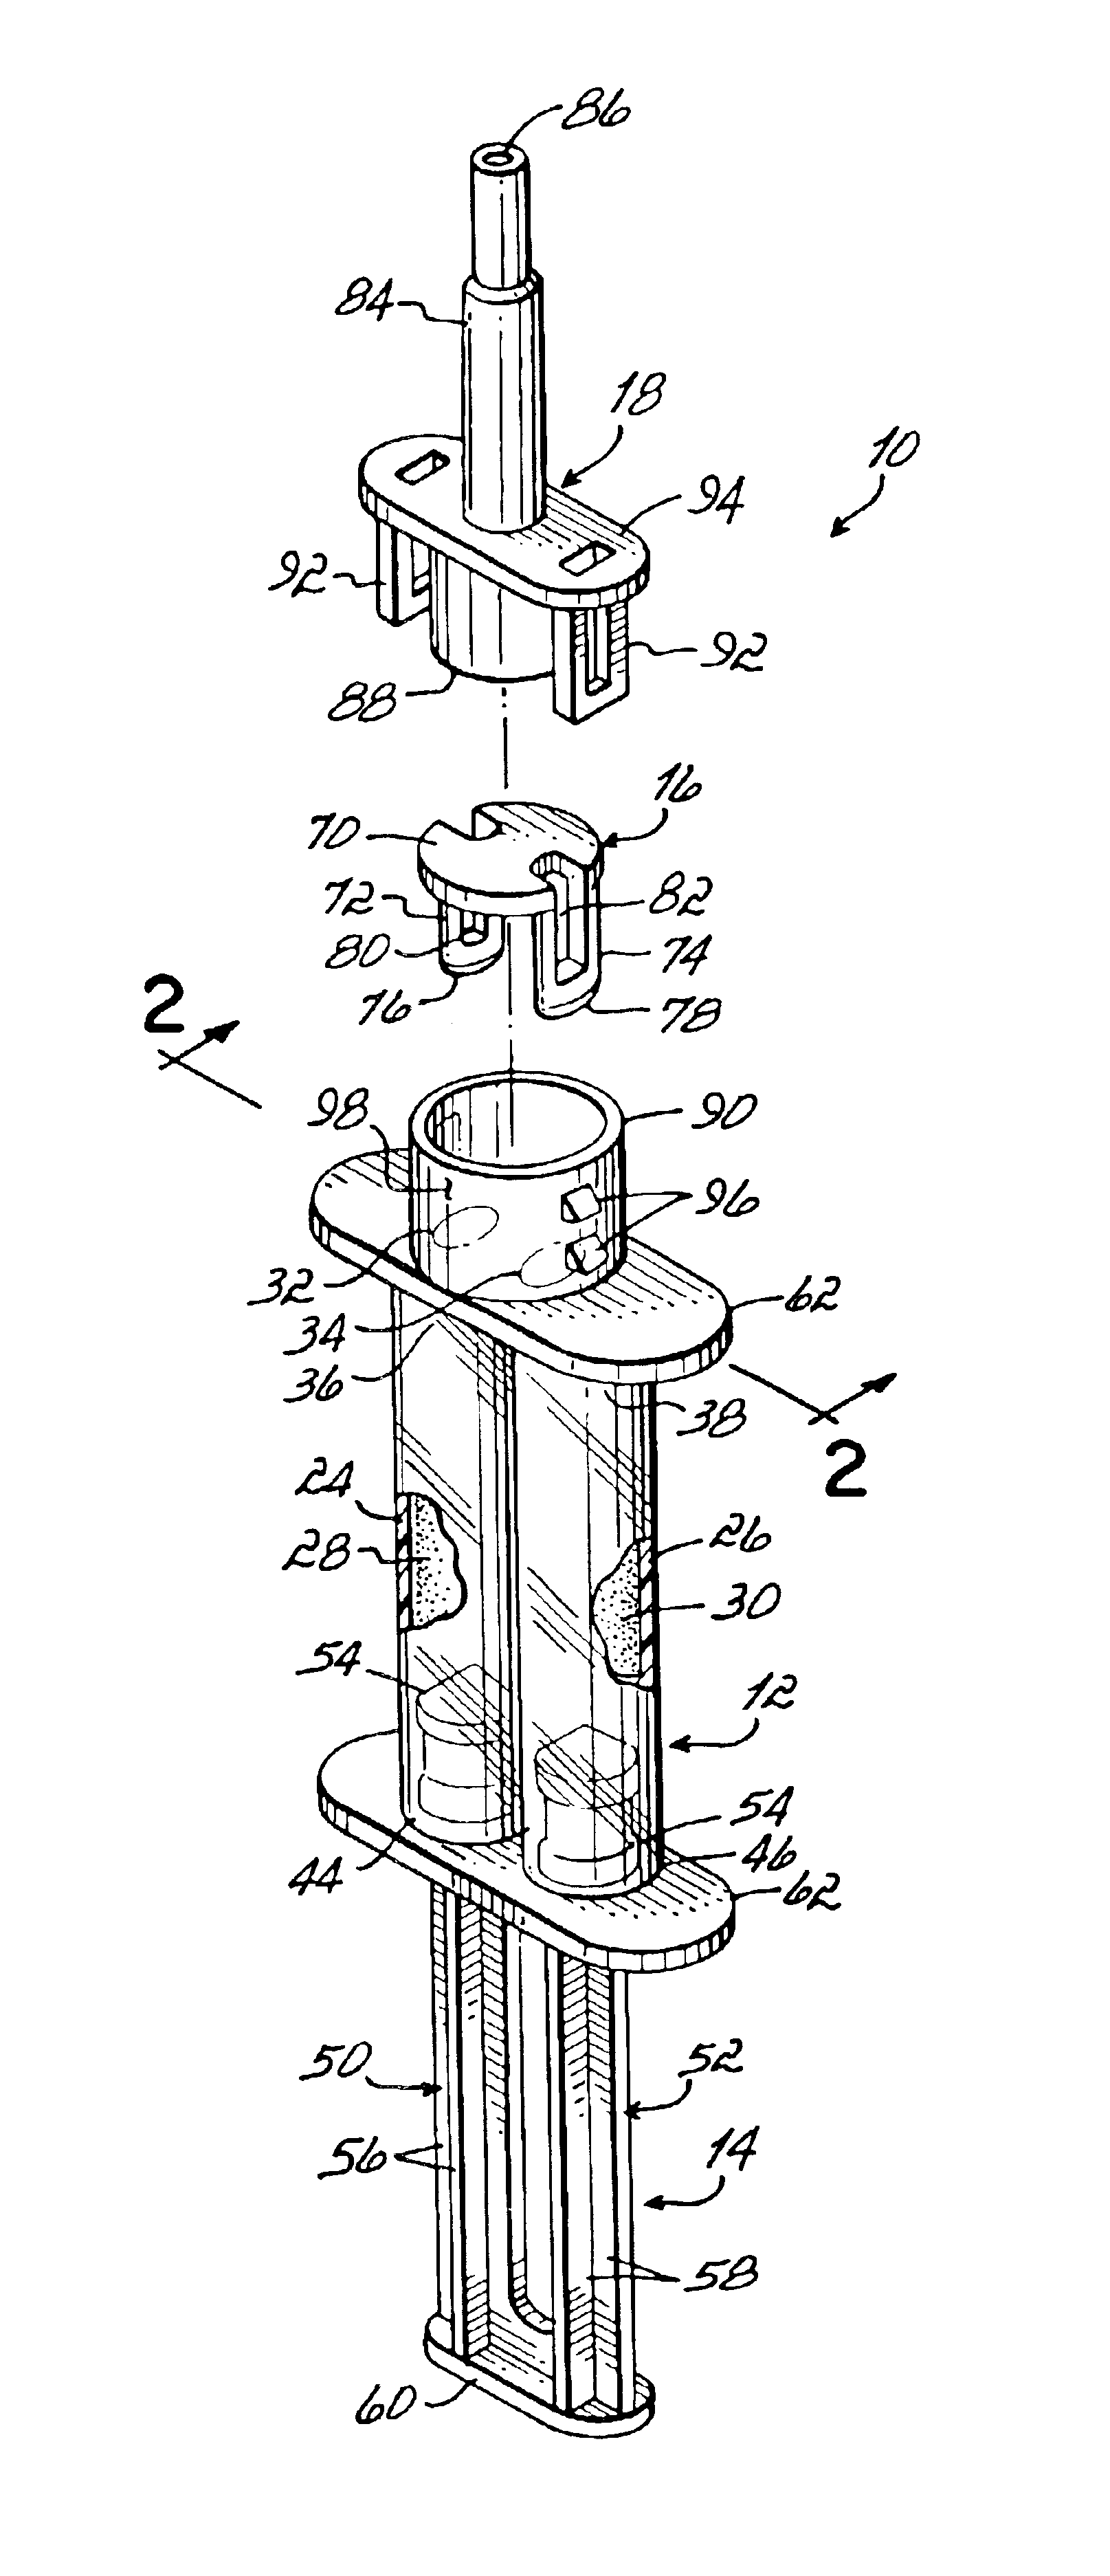 Single dose dental impression material delivery system and method